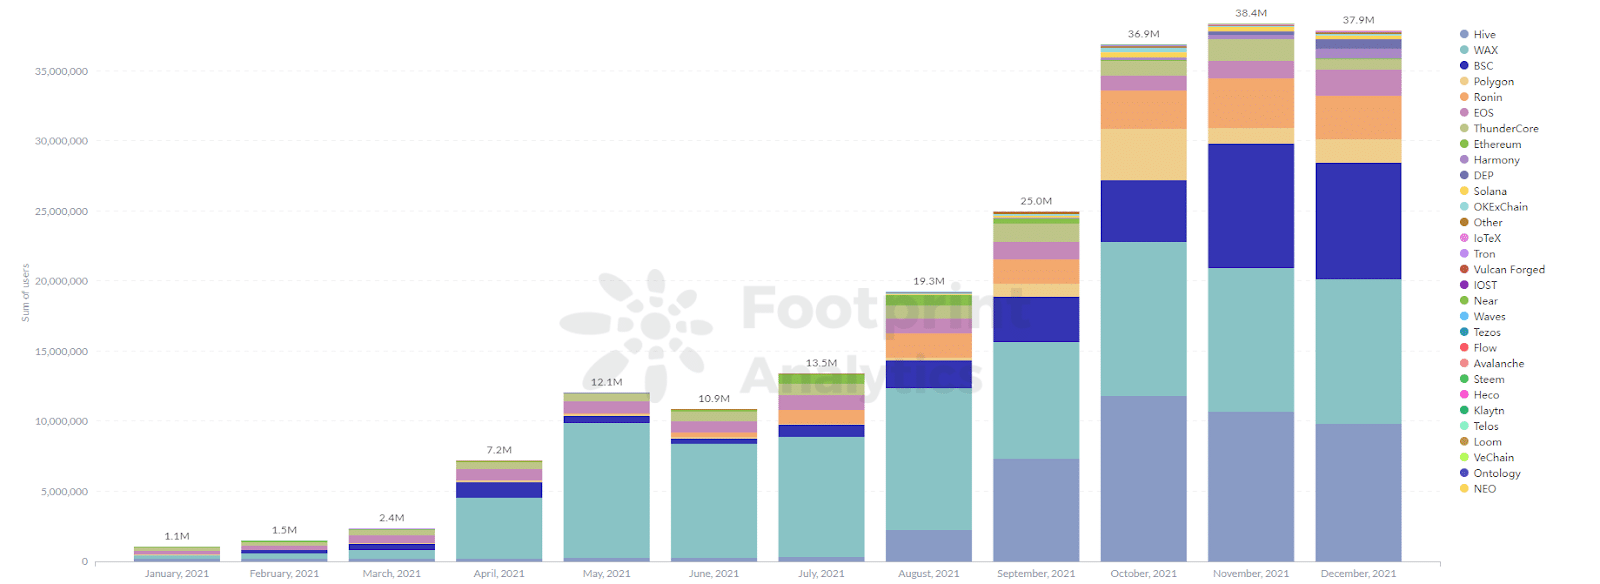 Footprint Analytics - Monthly GameFi Users of Different Public Chains